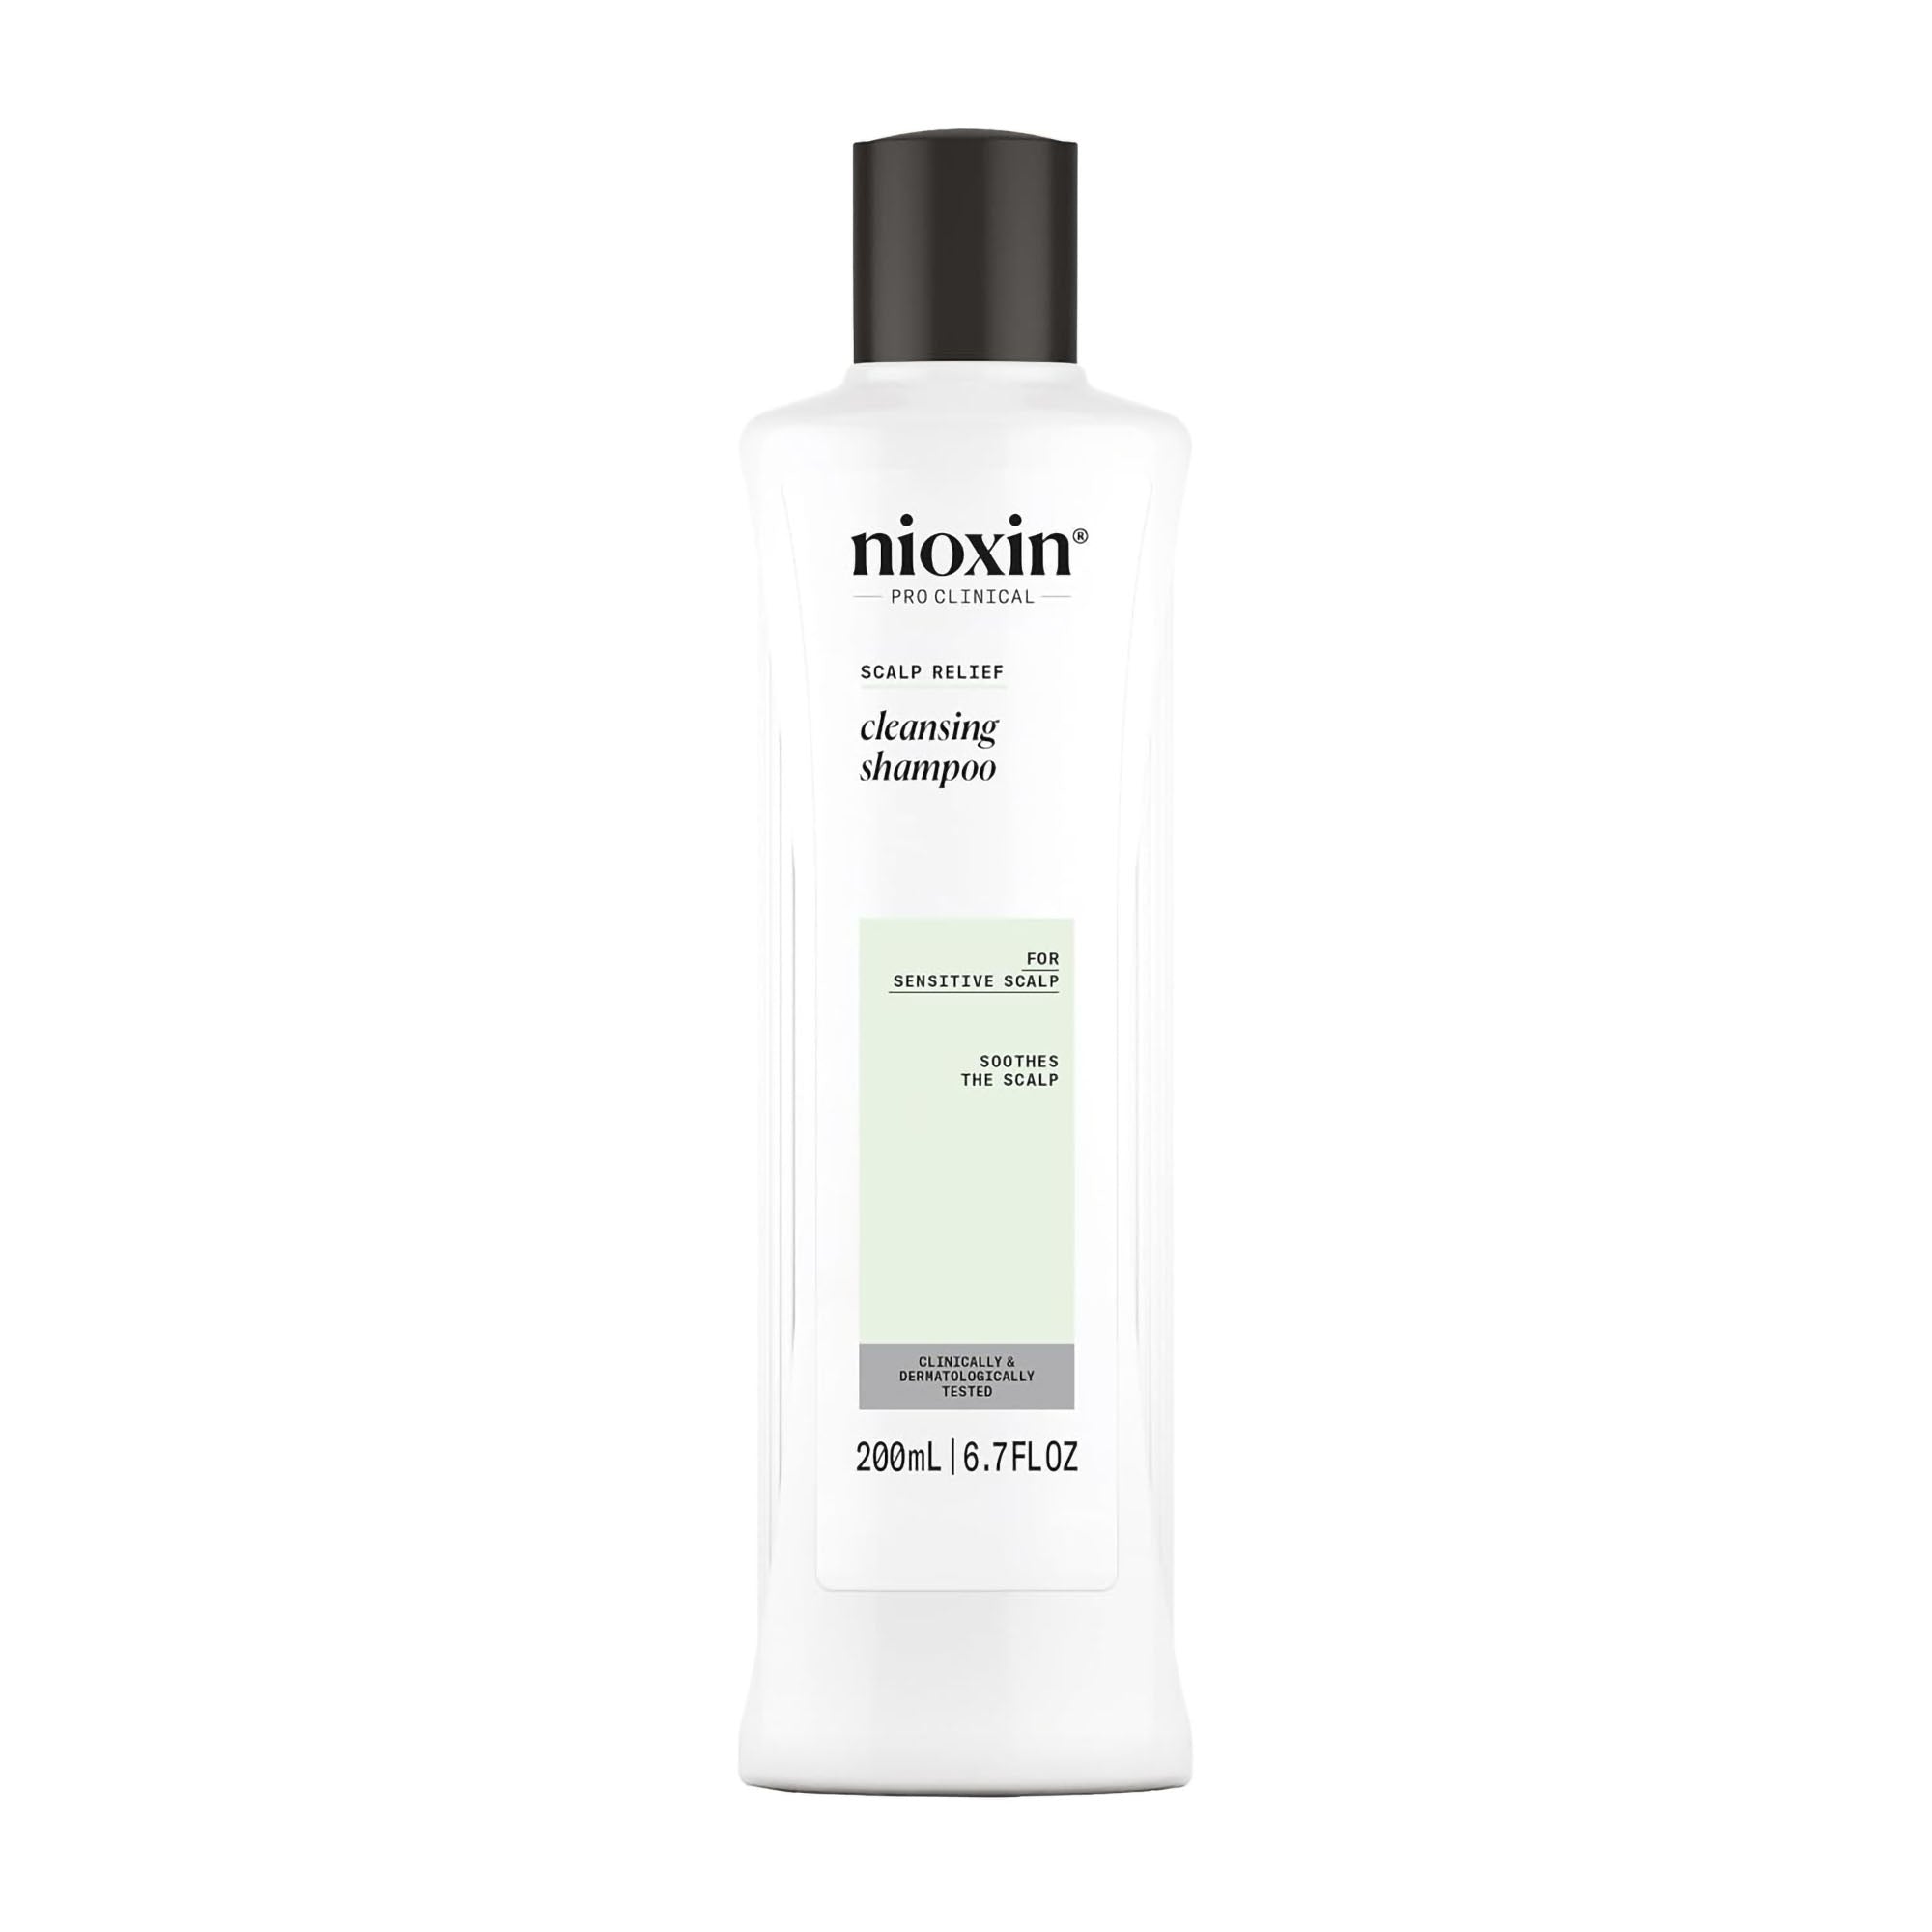 Nioxin Scalp Relief Cleansing Shampoo and Scalp + Hair Conditioner 6.7oz Duo ($52 Value) / 6.7OZ